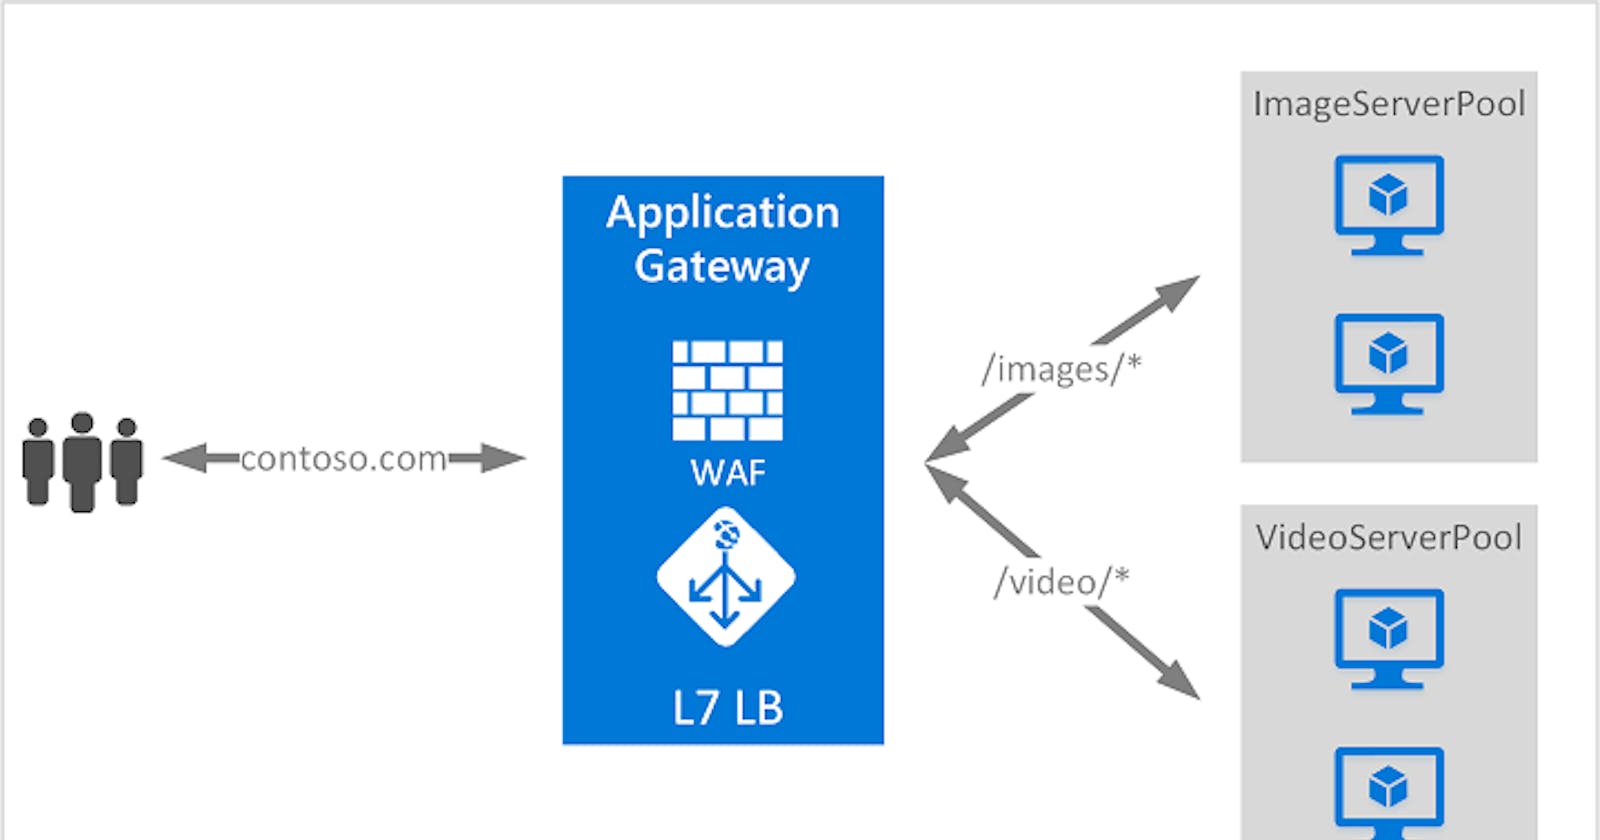 Azure Application Gateway: A Journey into Seamless Application Delivery